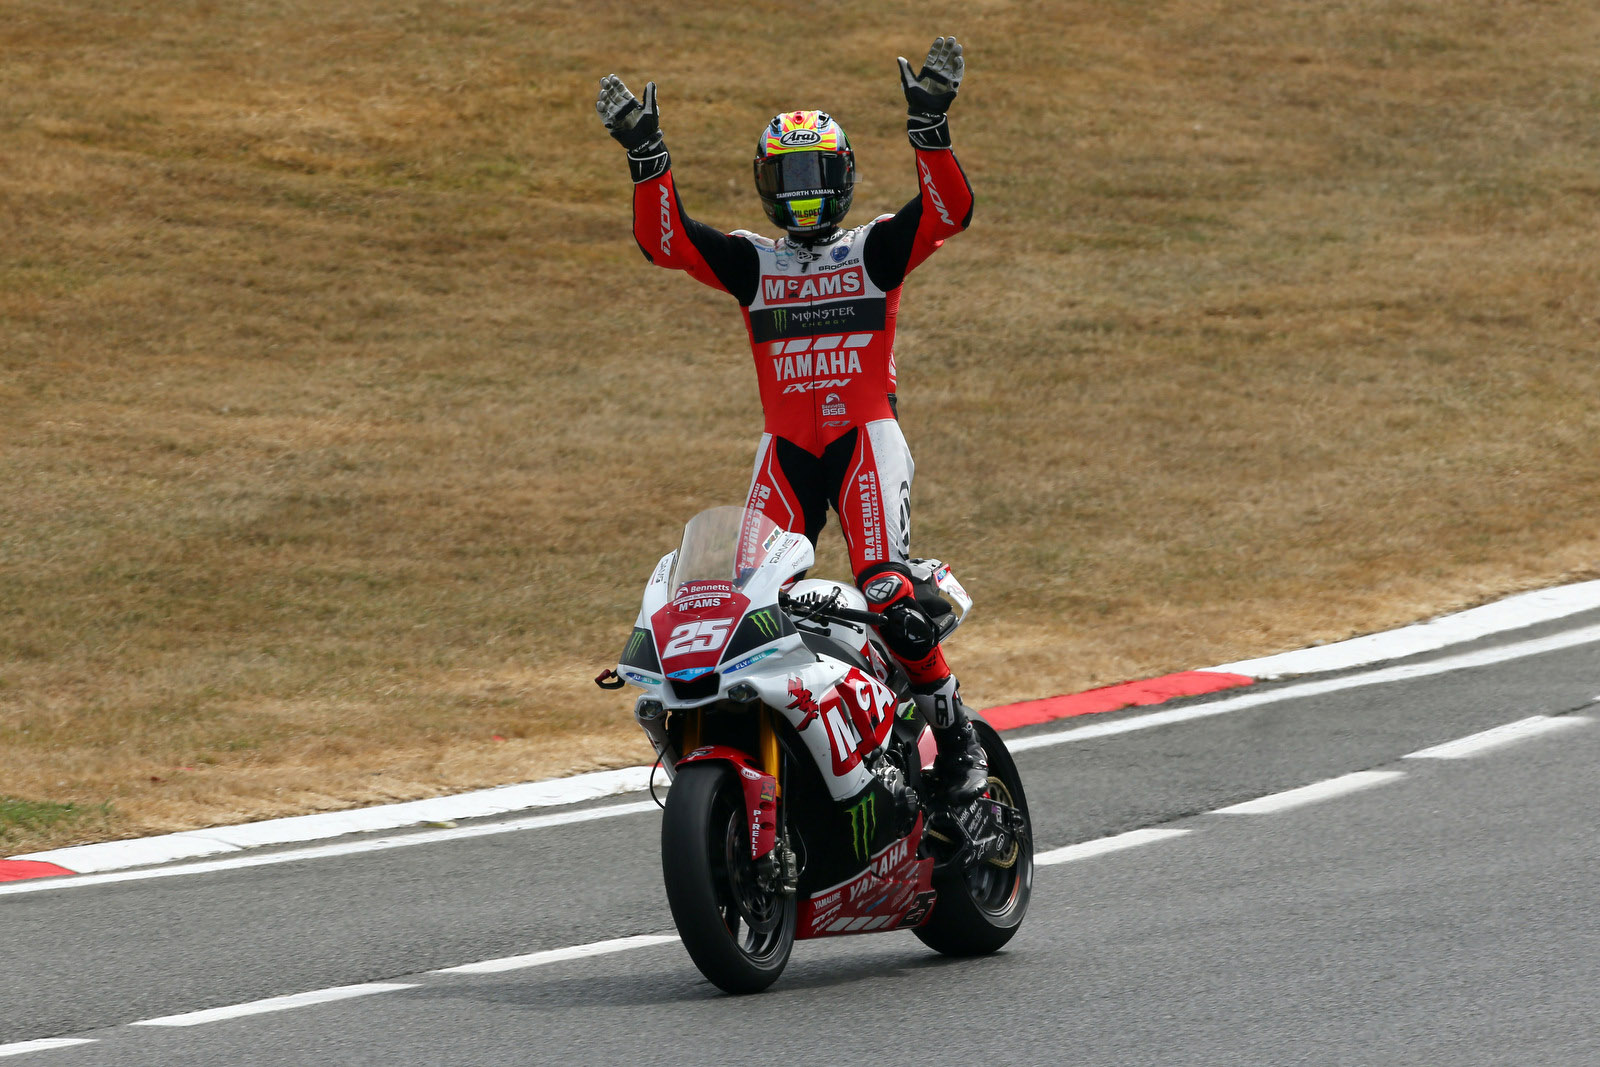 Brookes celebrating after race win credit Tim Keeton (Impact Images Photography)